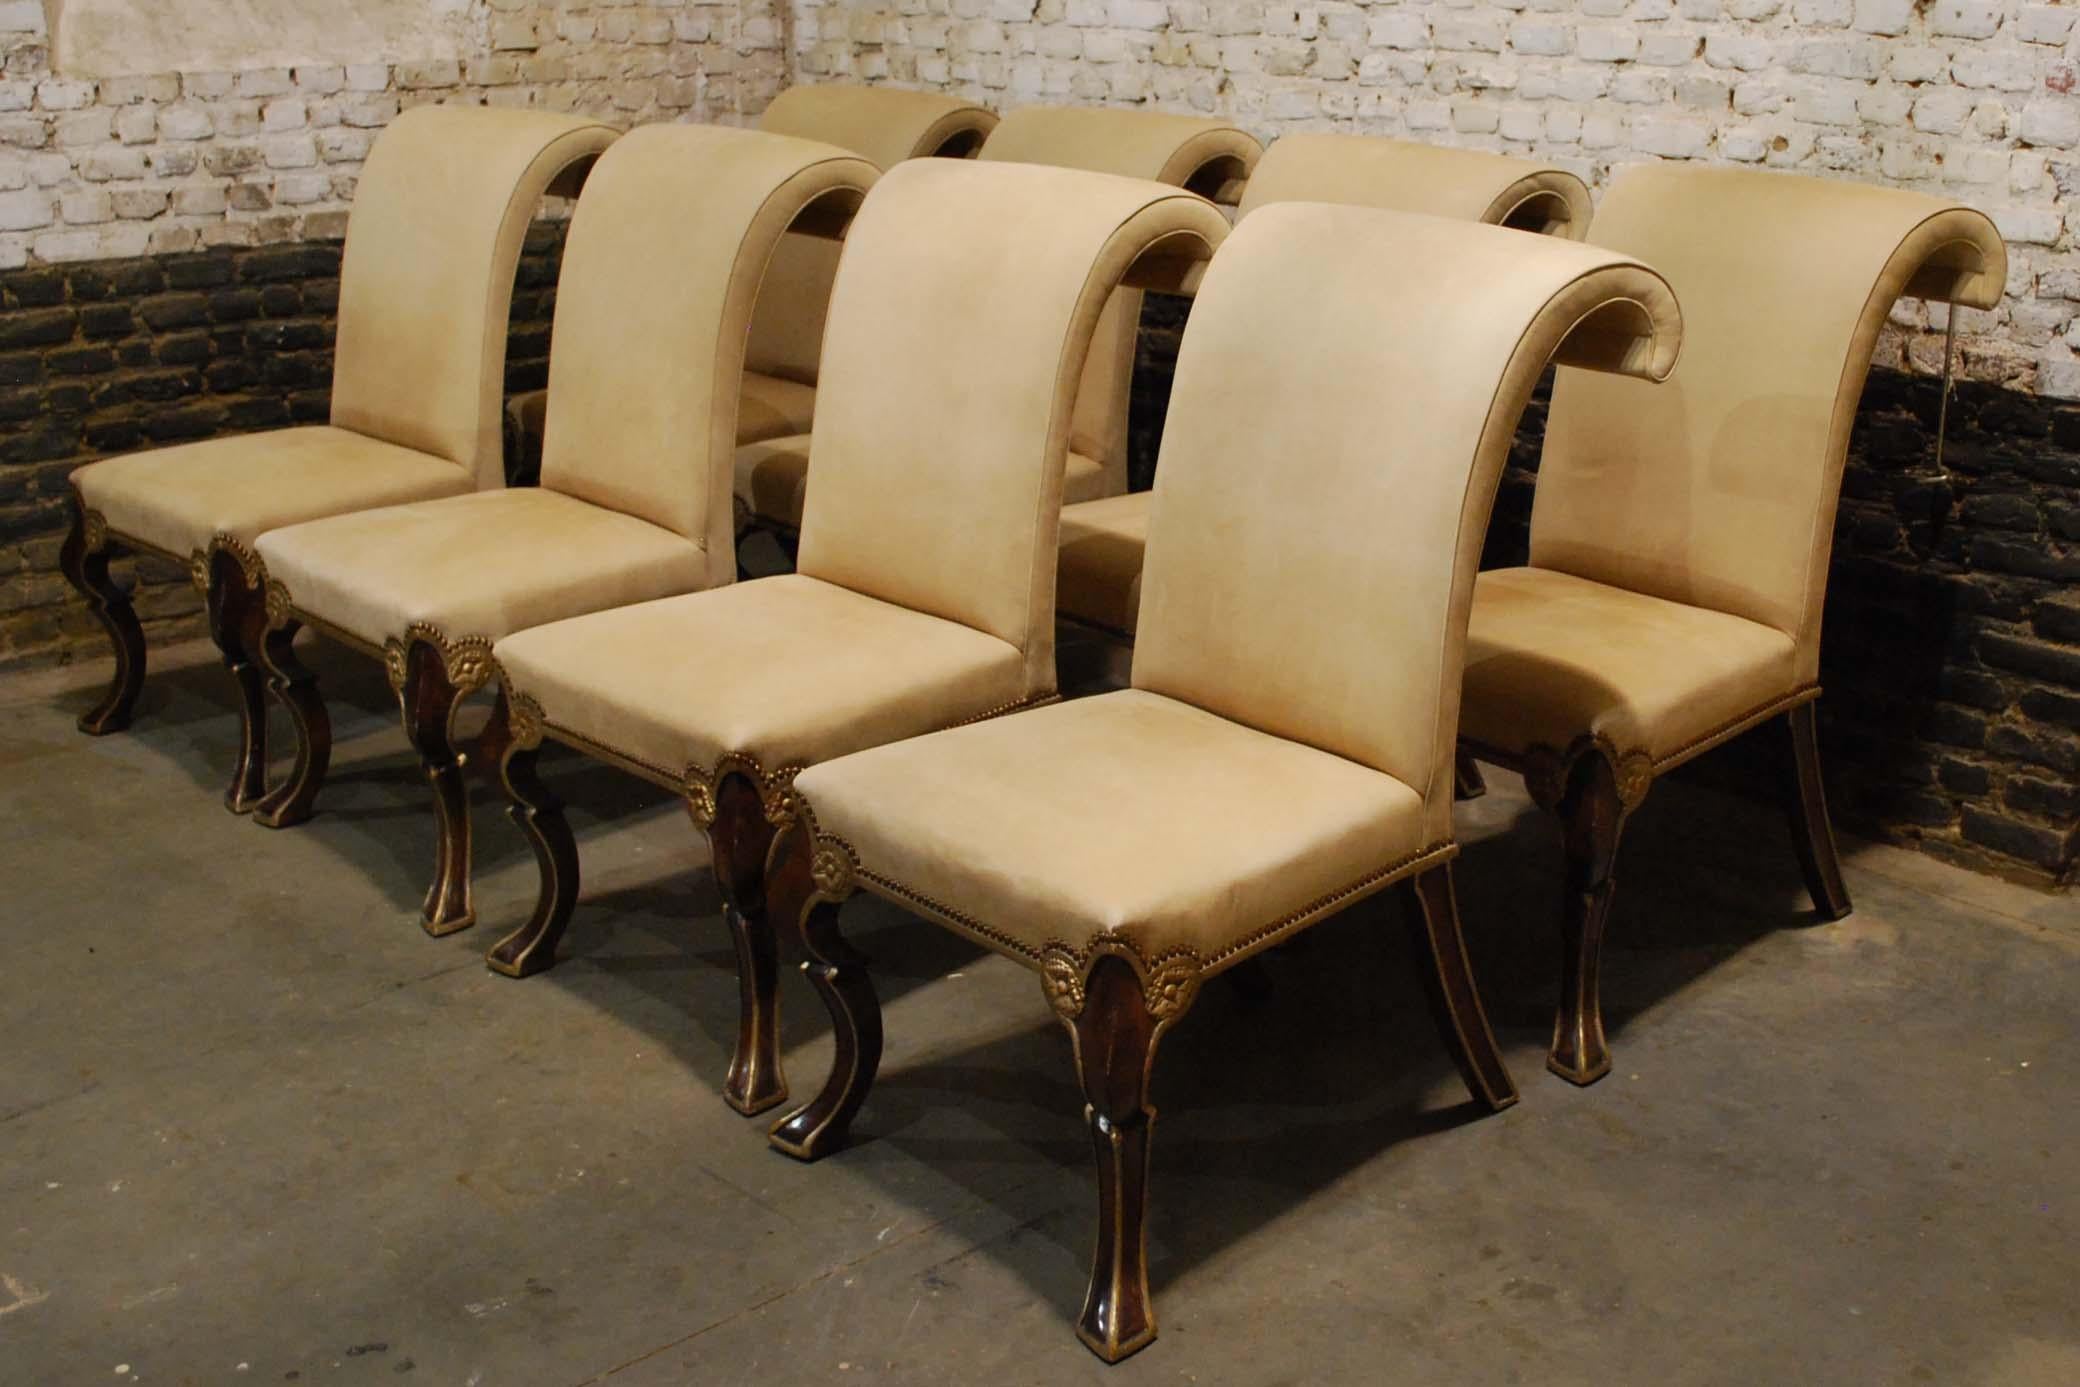 An exclusive and large set of eight handmade Puccini dining chairs by Rose Tarlow Melrose House.
The chairs have a tight seat and back in burgundy painted finish with a 22-karat gold trim. The burgundy paint finish is medium distressed. This was